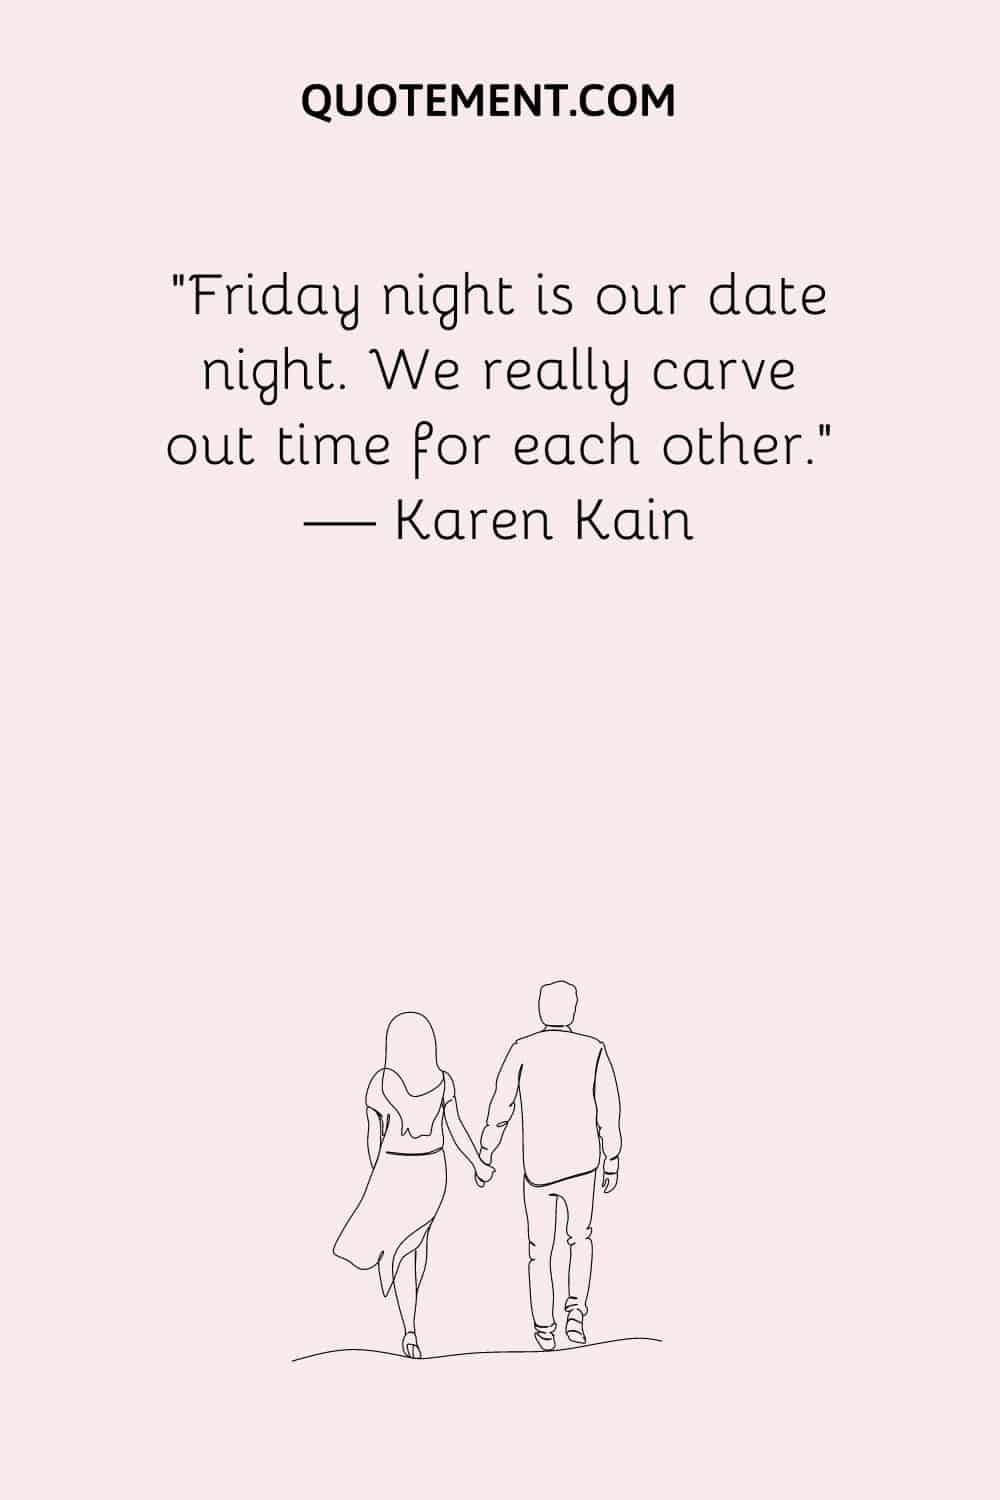 Friday night is our date night. We really carve out time for each other